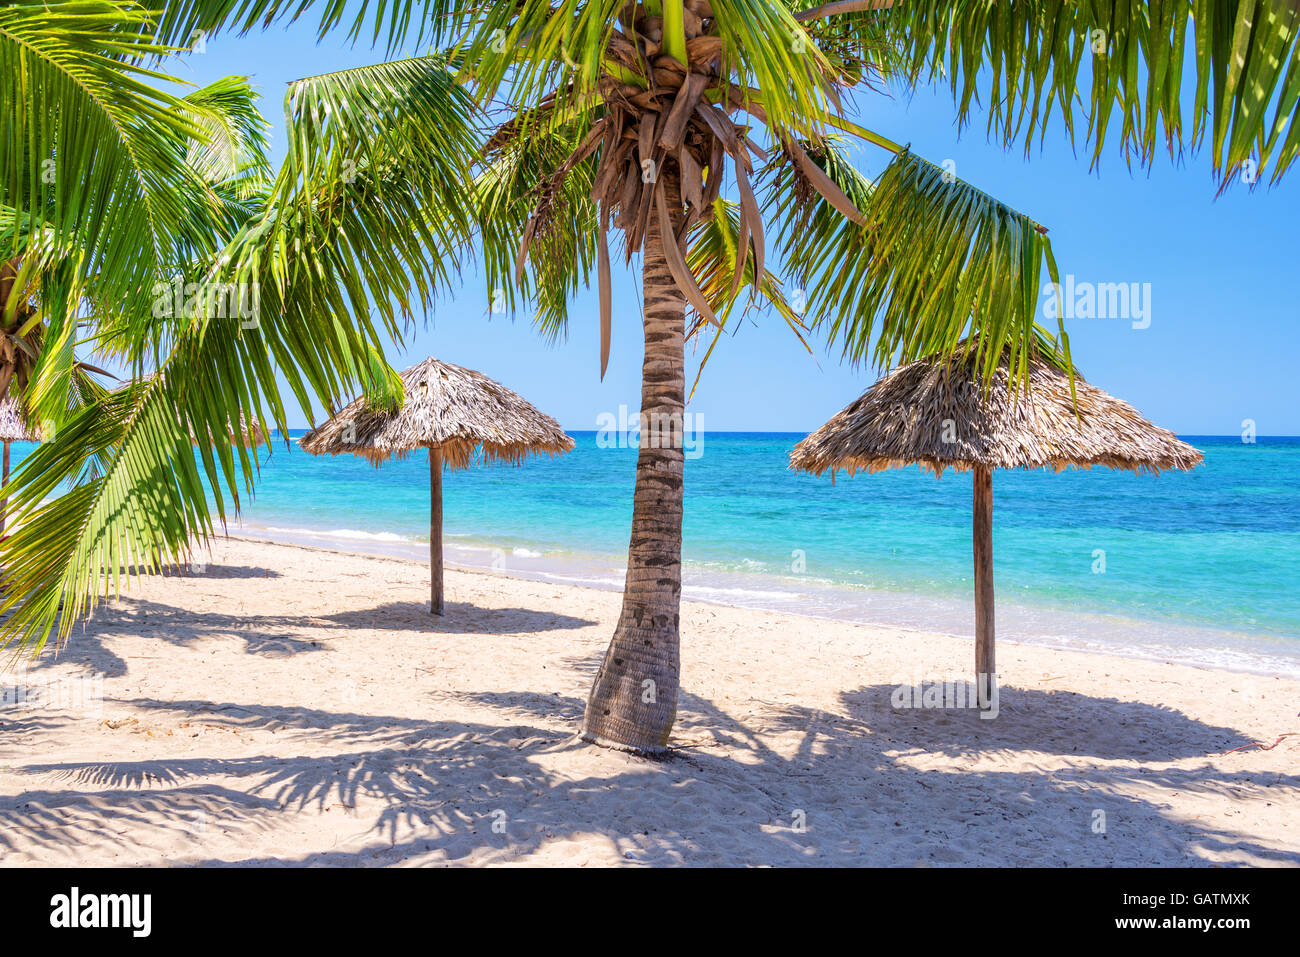 Straw umbrellas and palm trees on a beautiful tropical beach Stock Photo